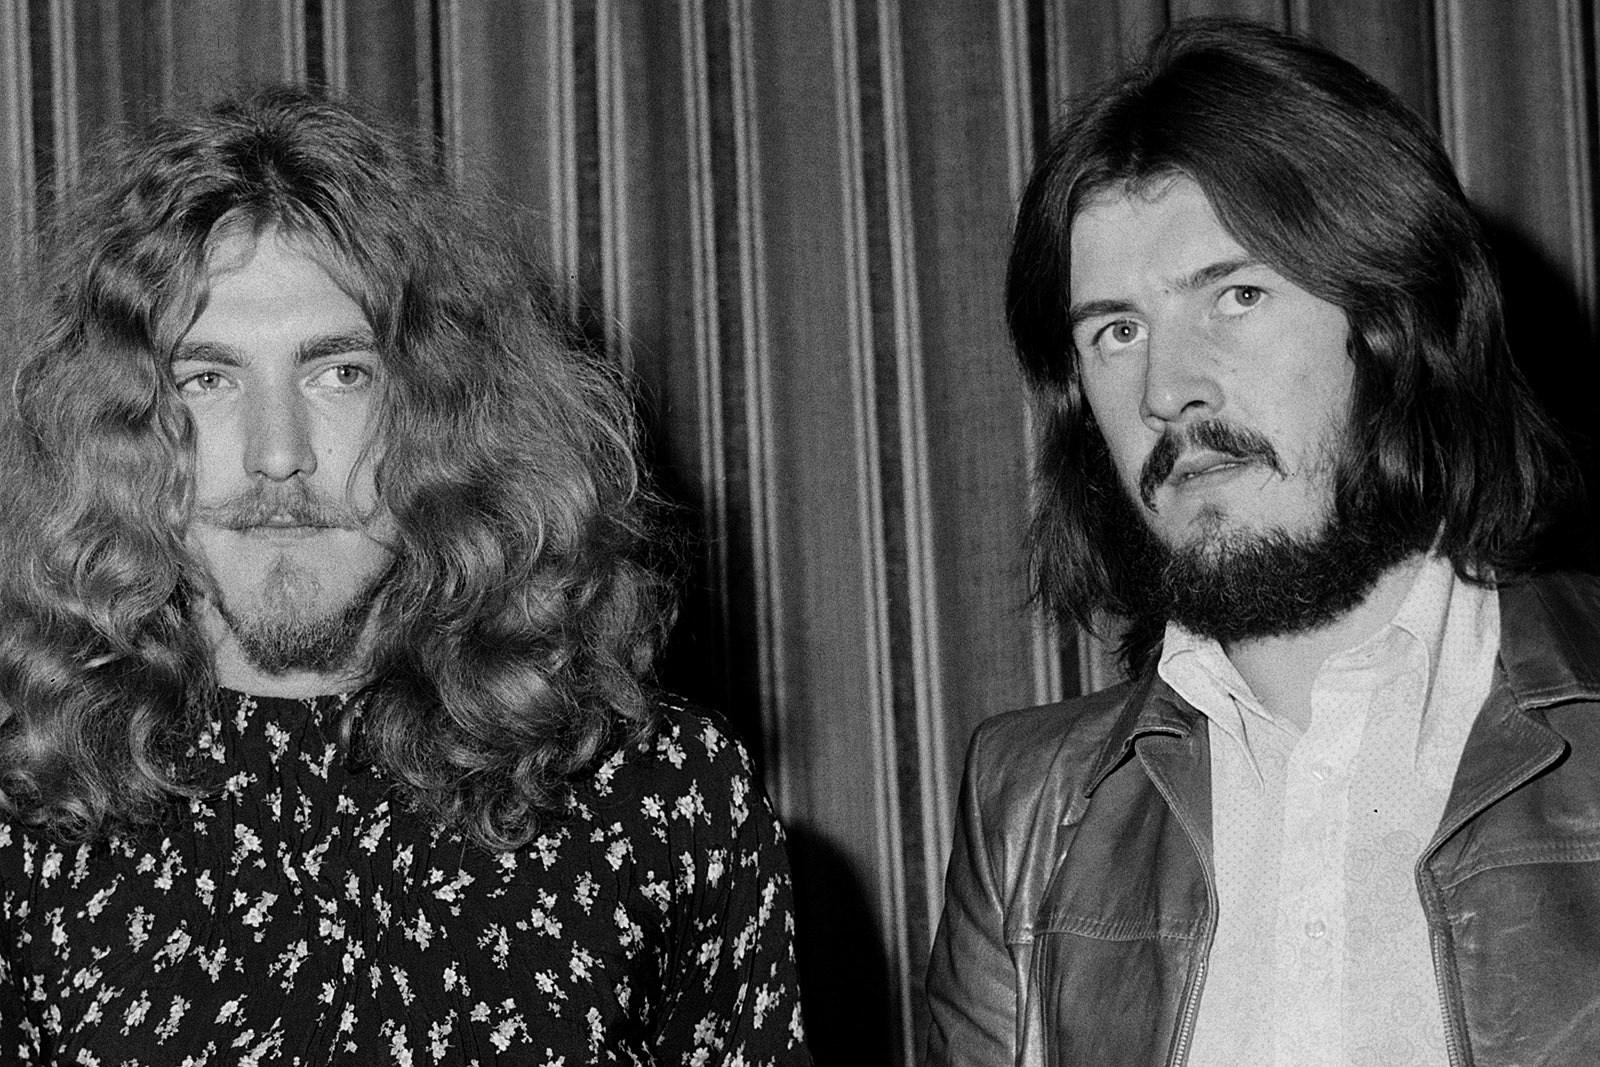 Robert Plant Stole Fuel to Be in Band With John Bonham